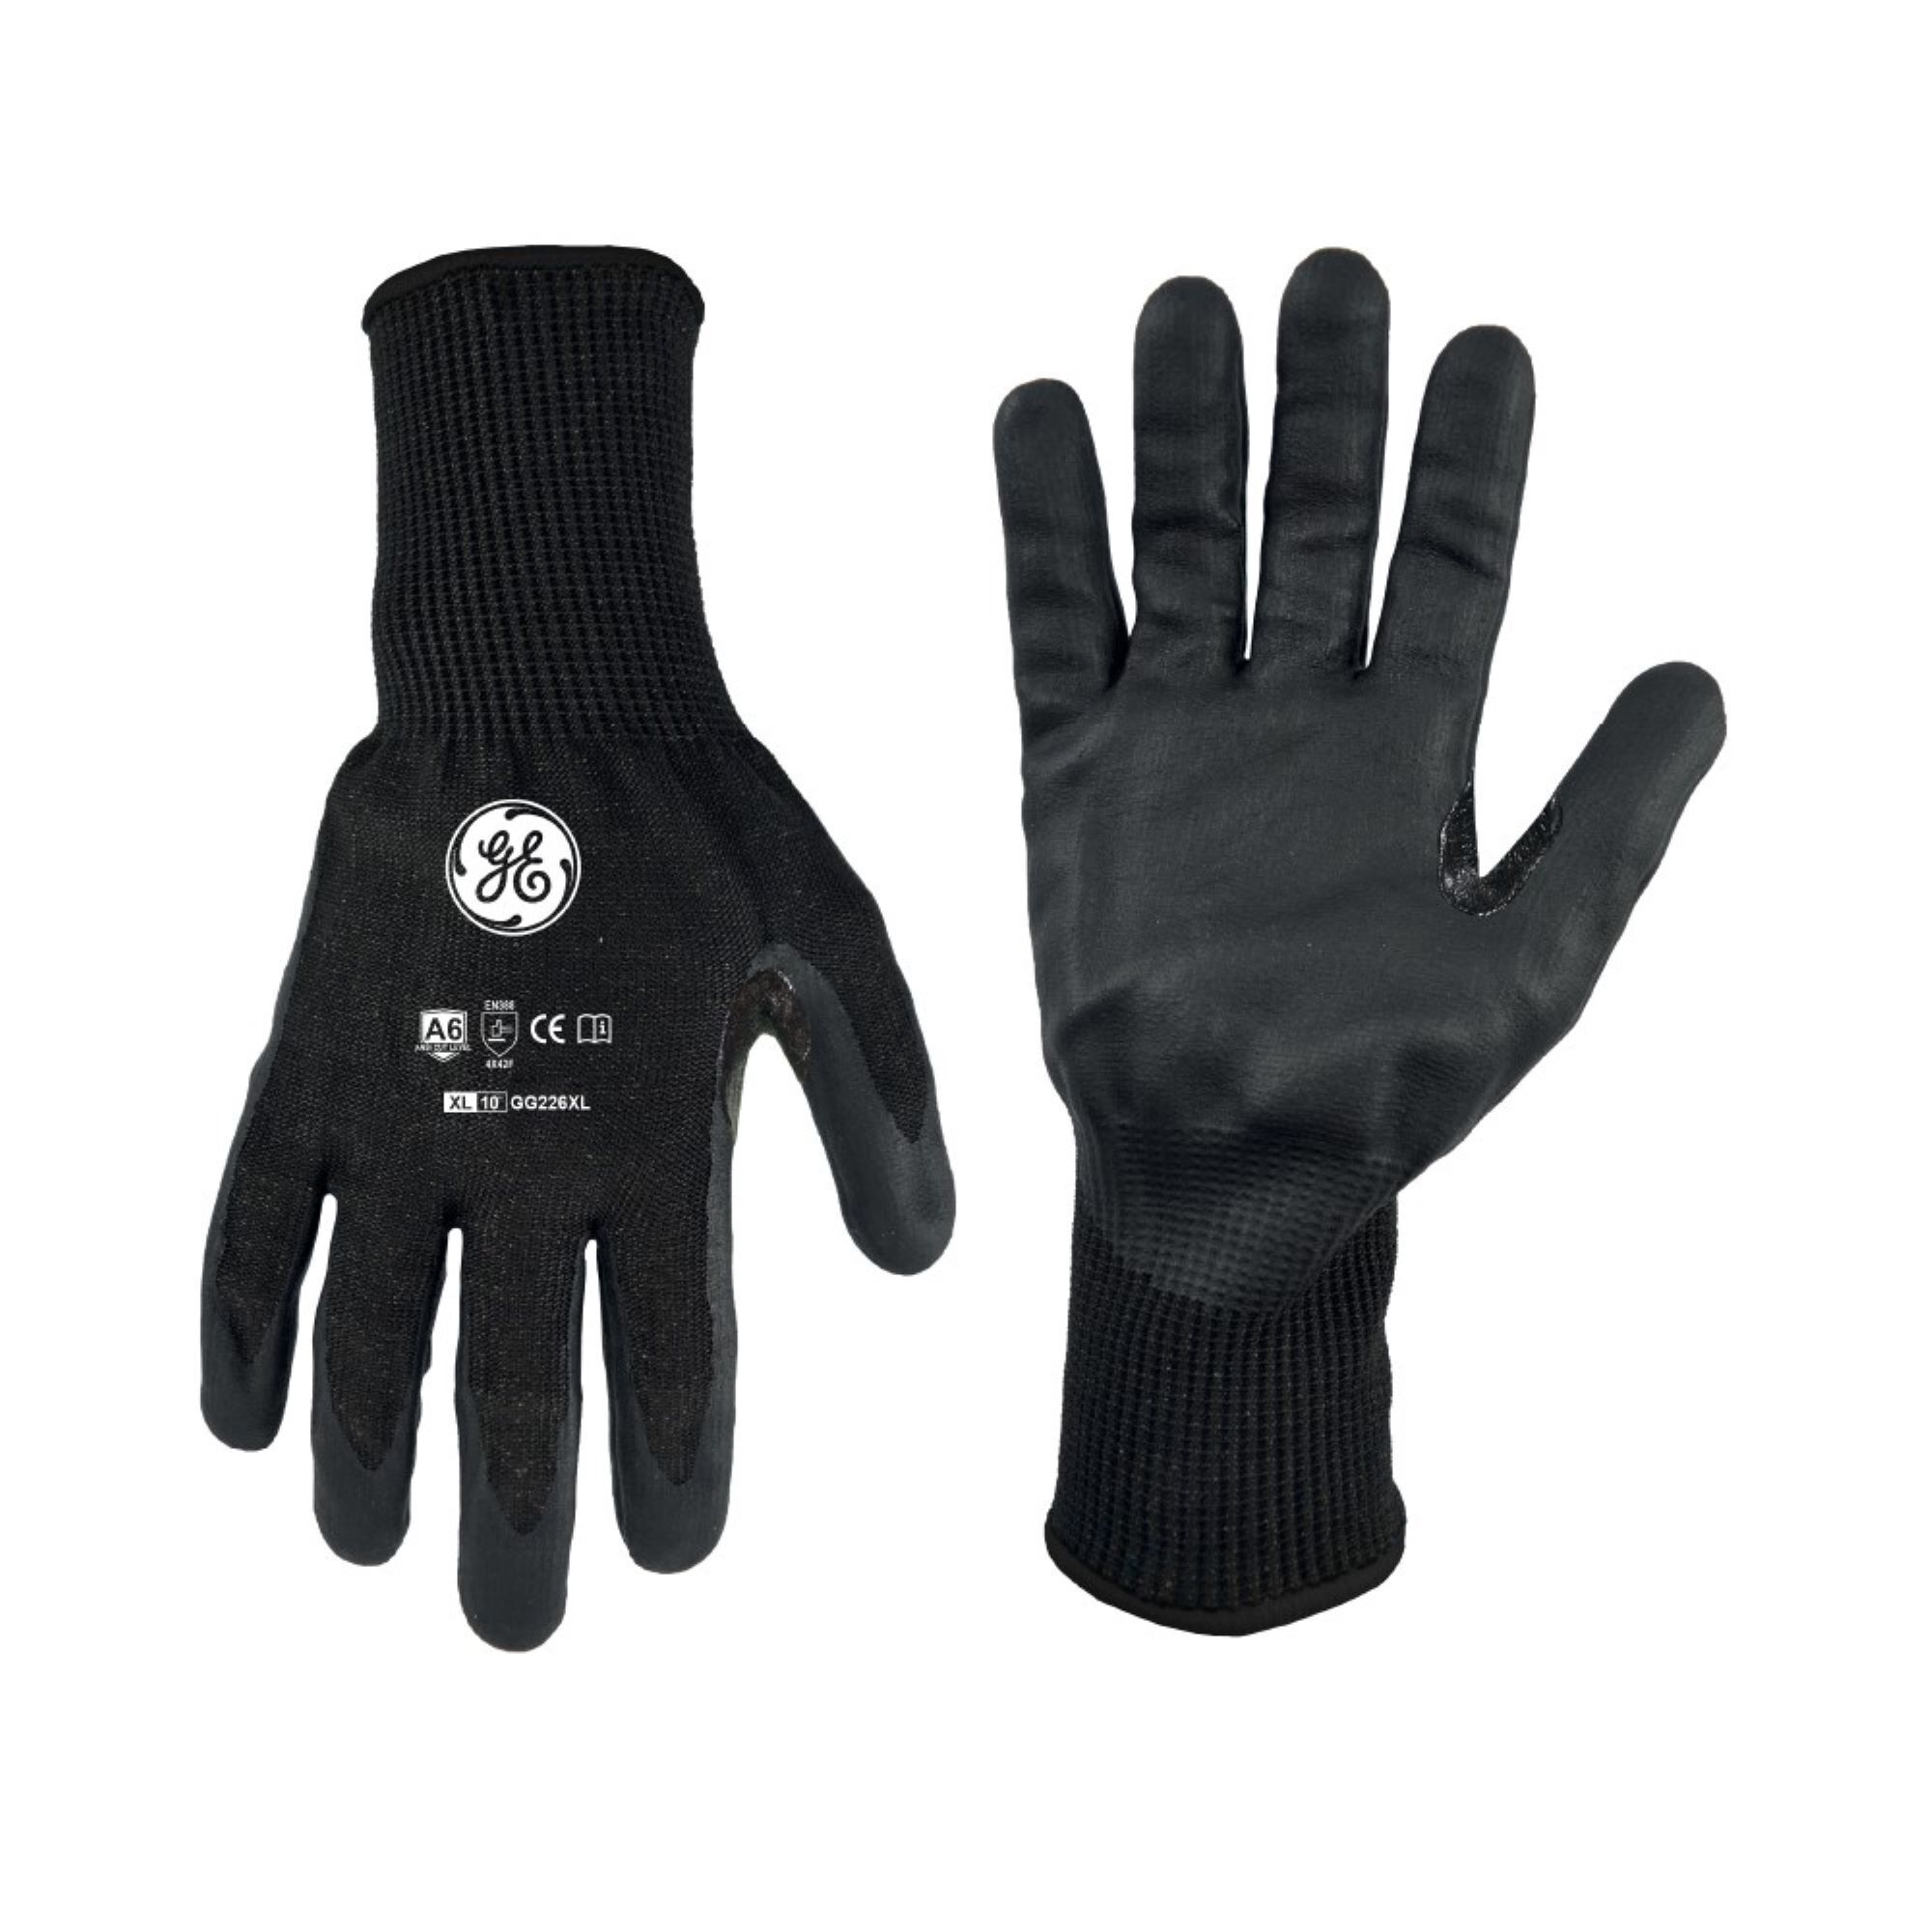 General Electric, XL Foam Nitrile Black Dipped Gloves 1 pair, Size XL, Included (qty.) 1, Model GG226XLC